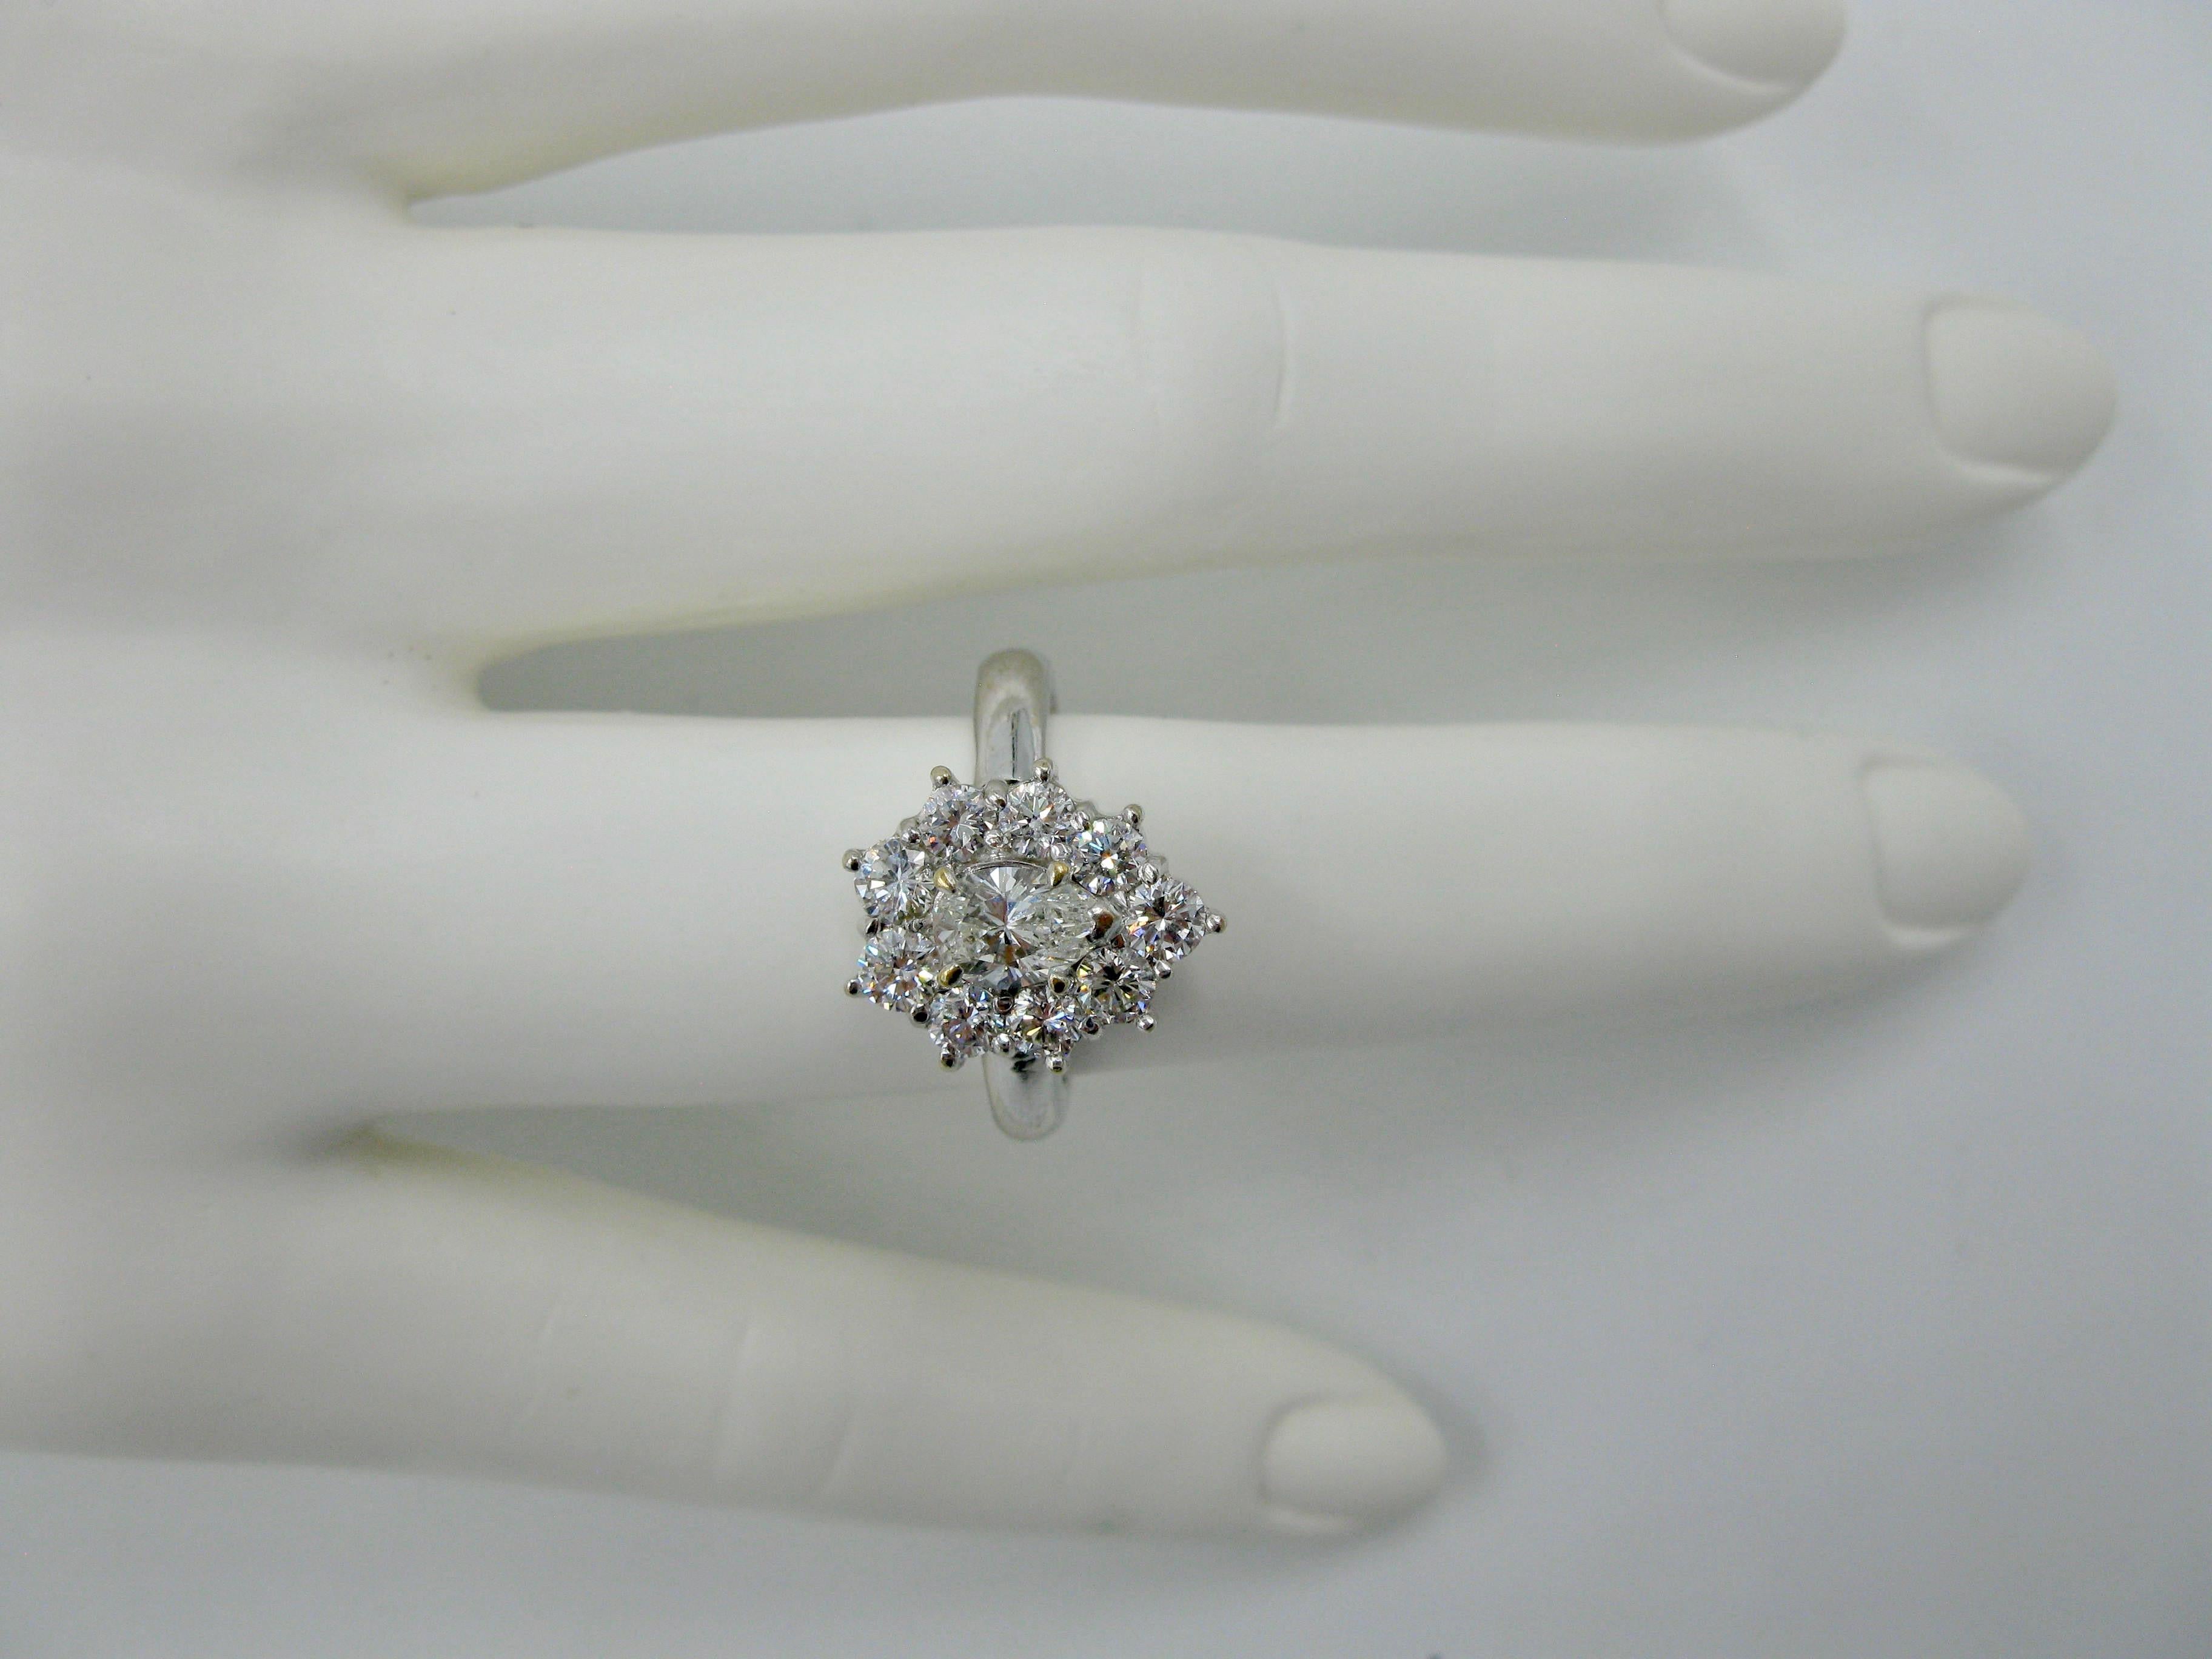 A dramatic Diamond Wedding Engagement Ring or Cocktail Ring with a stunning central pear shape diamond of .56 Carat.  The diamond is a brilliant white, clean gem that is I color and VS clarity.  This stunner is surrounded by a halo of nine round